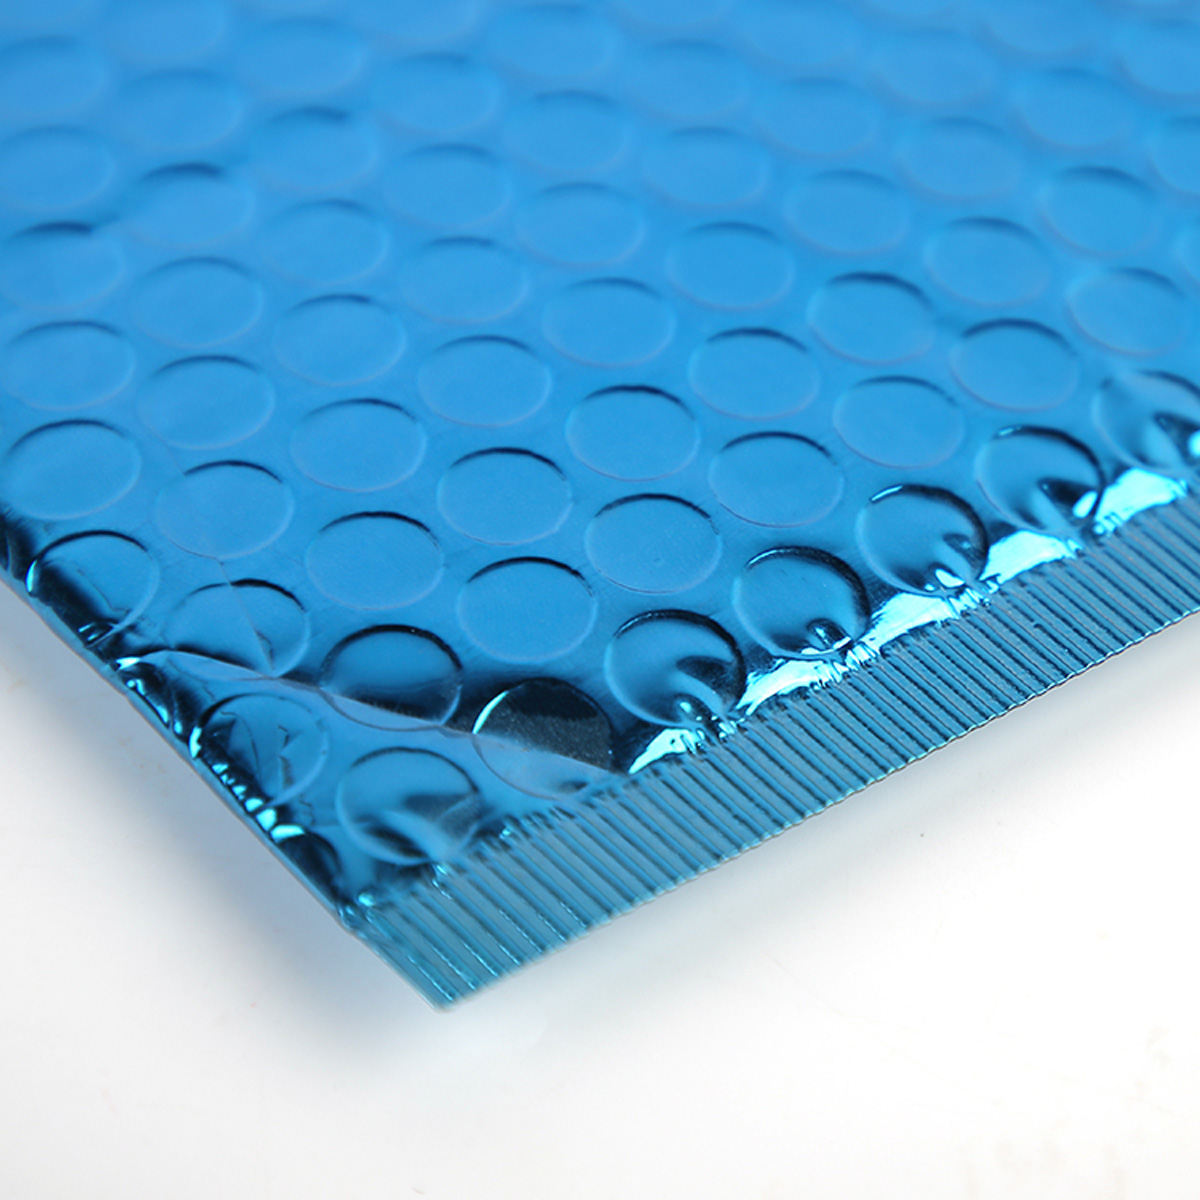 Blue Metallic Bubble Padded Mailer Envelopes with Self Adhesive Closure